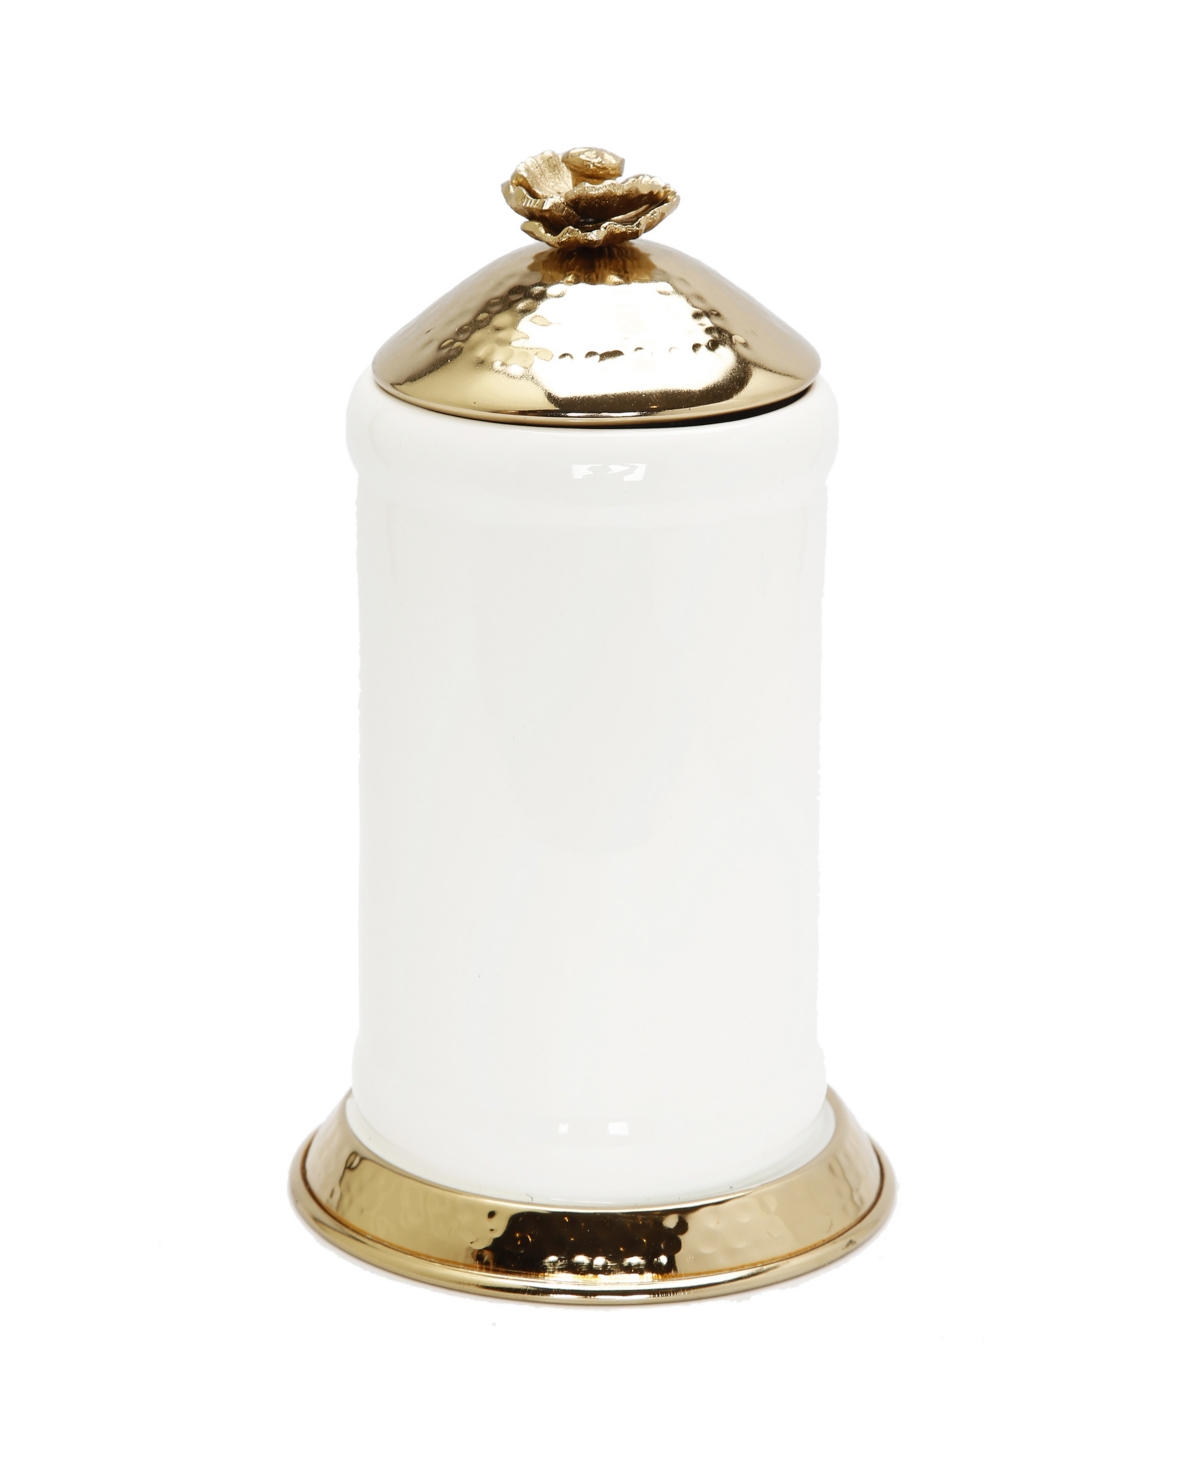 Glass Canister Hammered Lid and Base Flower Knob Set, 2 Piece - White and Gold-Tone